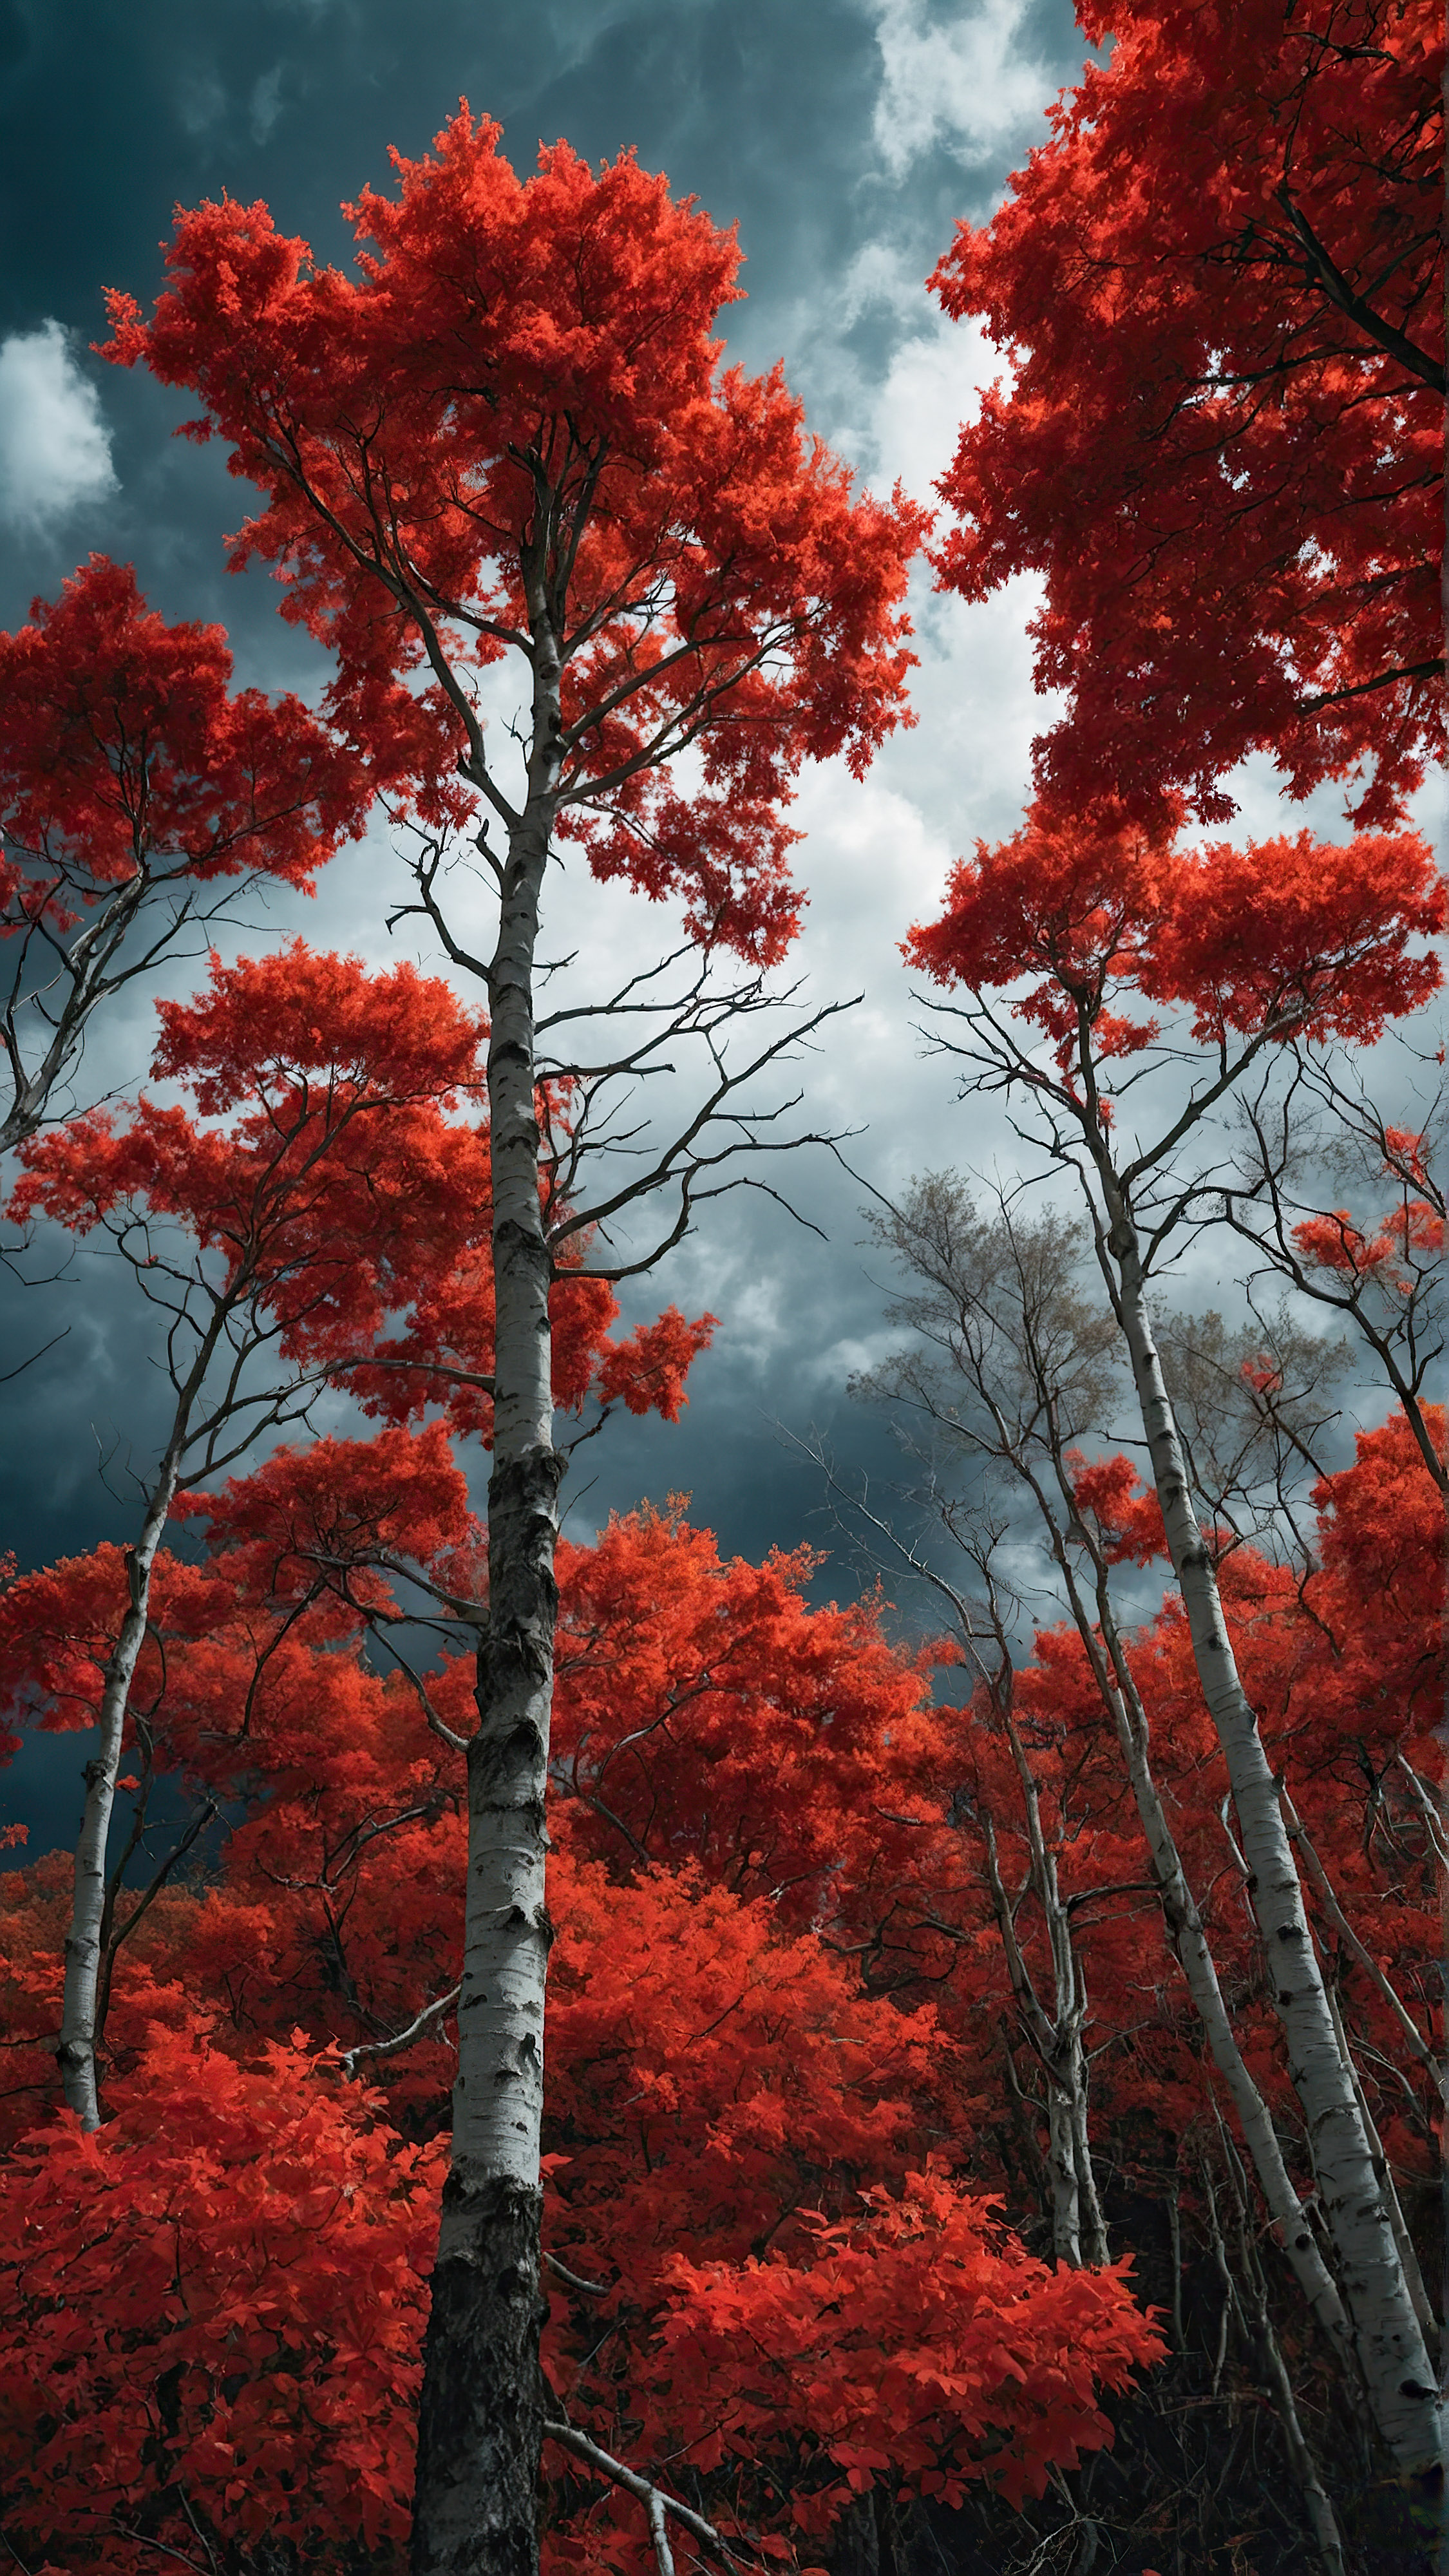 Get lost in the magic of autumn with our iPhone wallpaper, a surreal and dramatic scene of trees with bright red foliage under a dark sky with fluffy white clouds.